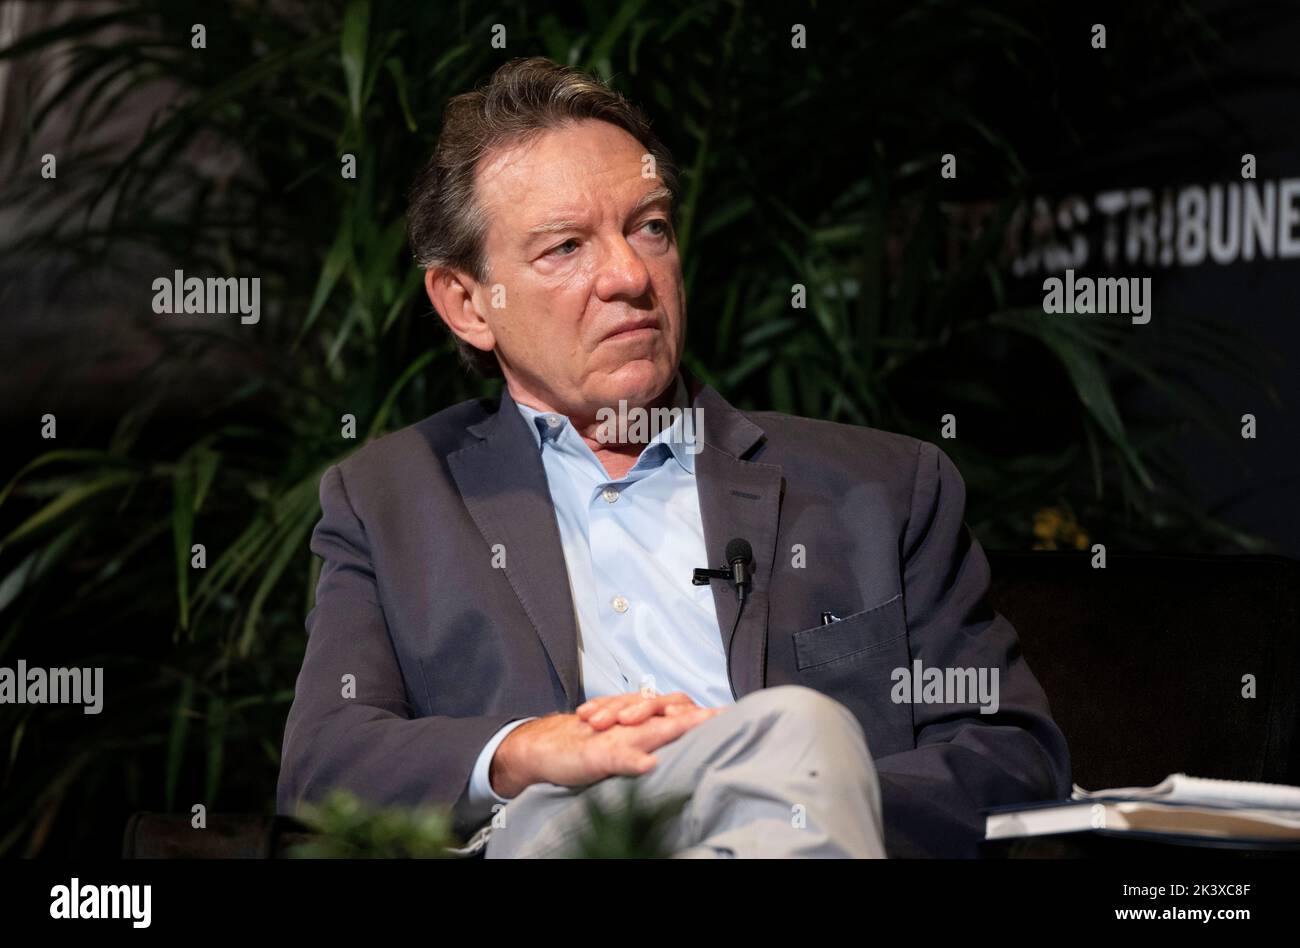 Author, playwright and staff writer for the New Yorker magazine LAWRENCE WRIGHT during an interview session with Beto O'Rourke (not shown) at the annual Texas Tribune Festival in downtown Austin on September 24, 2022. Stock Photo